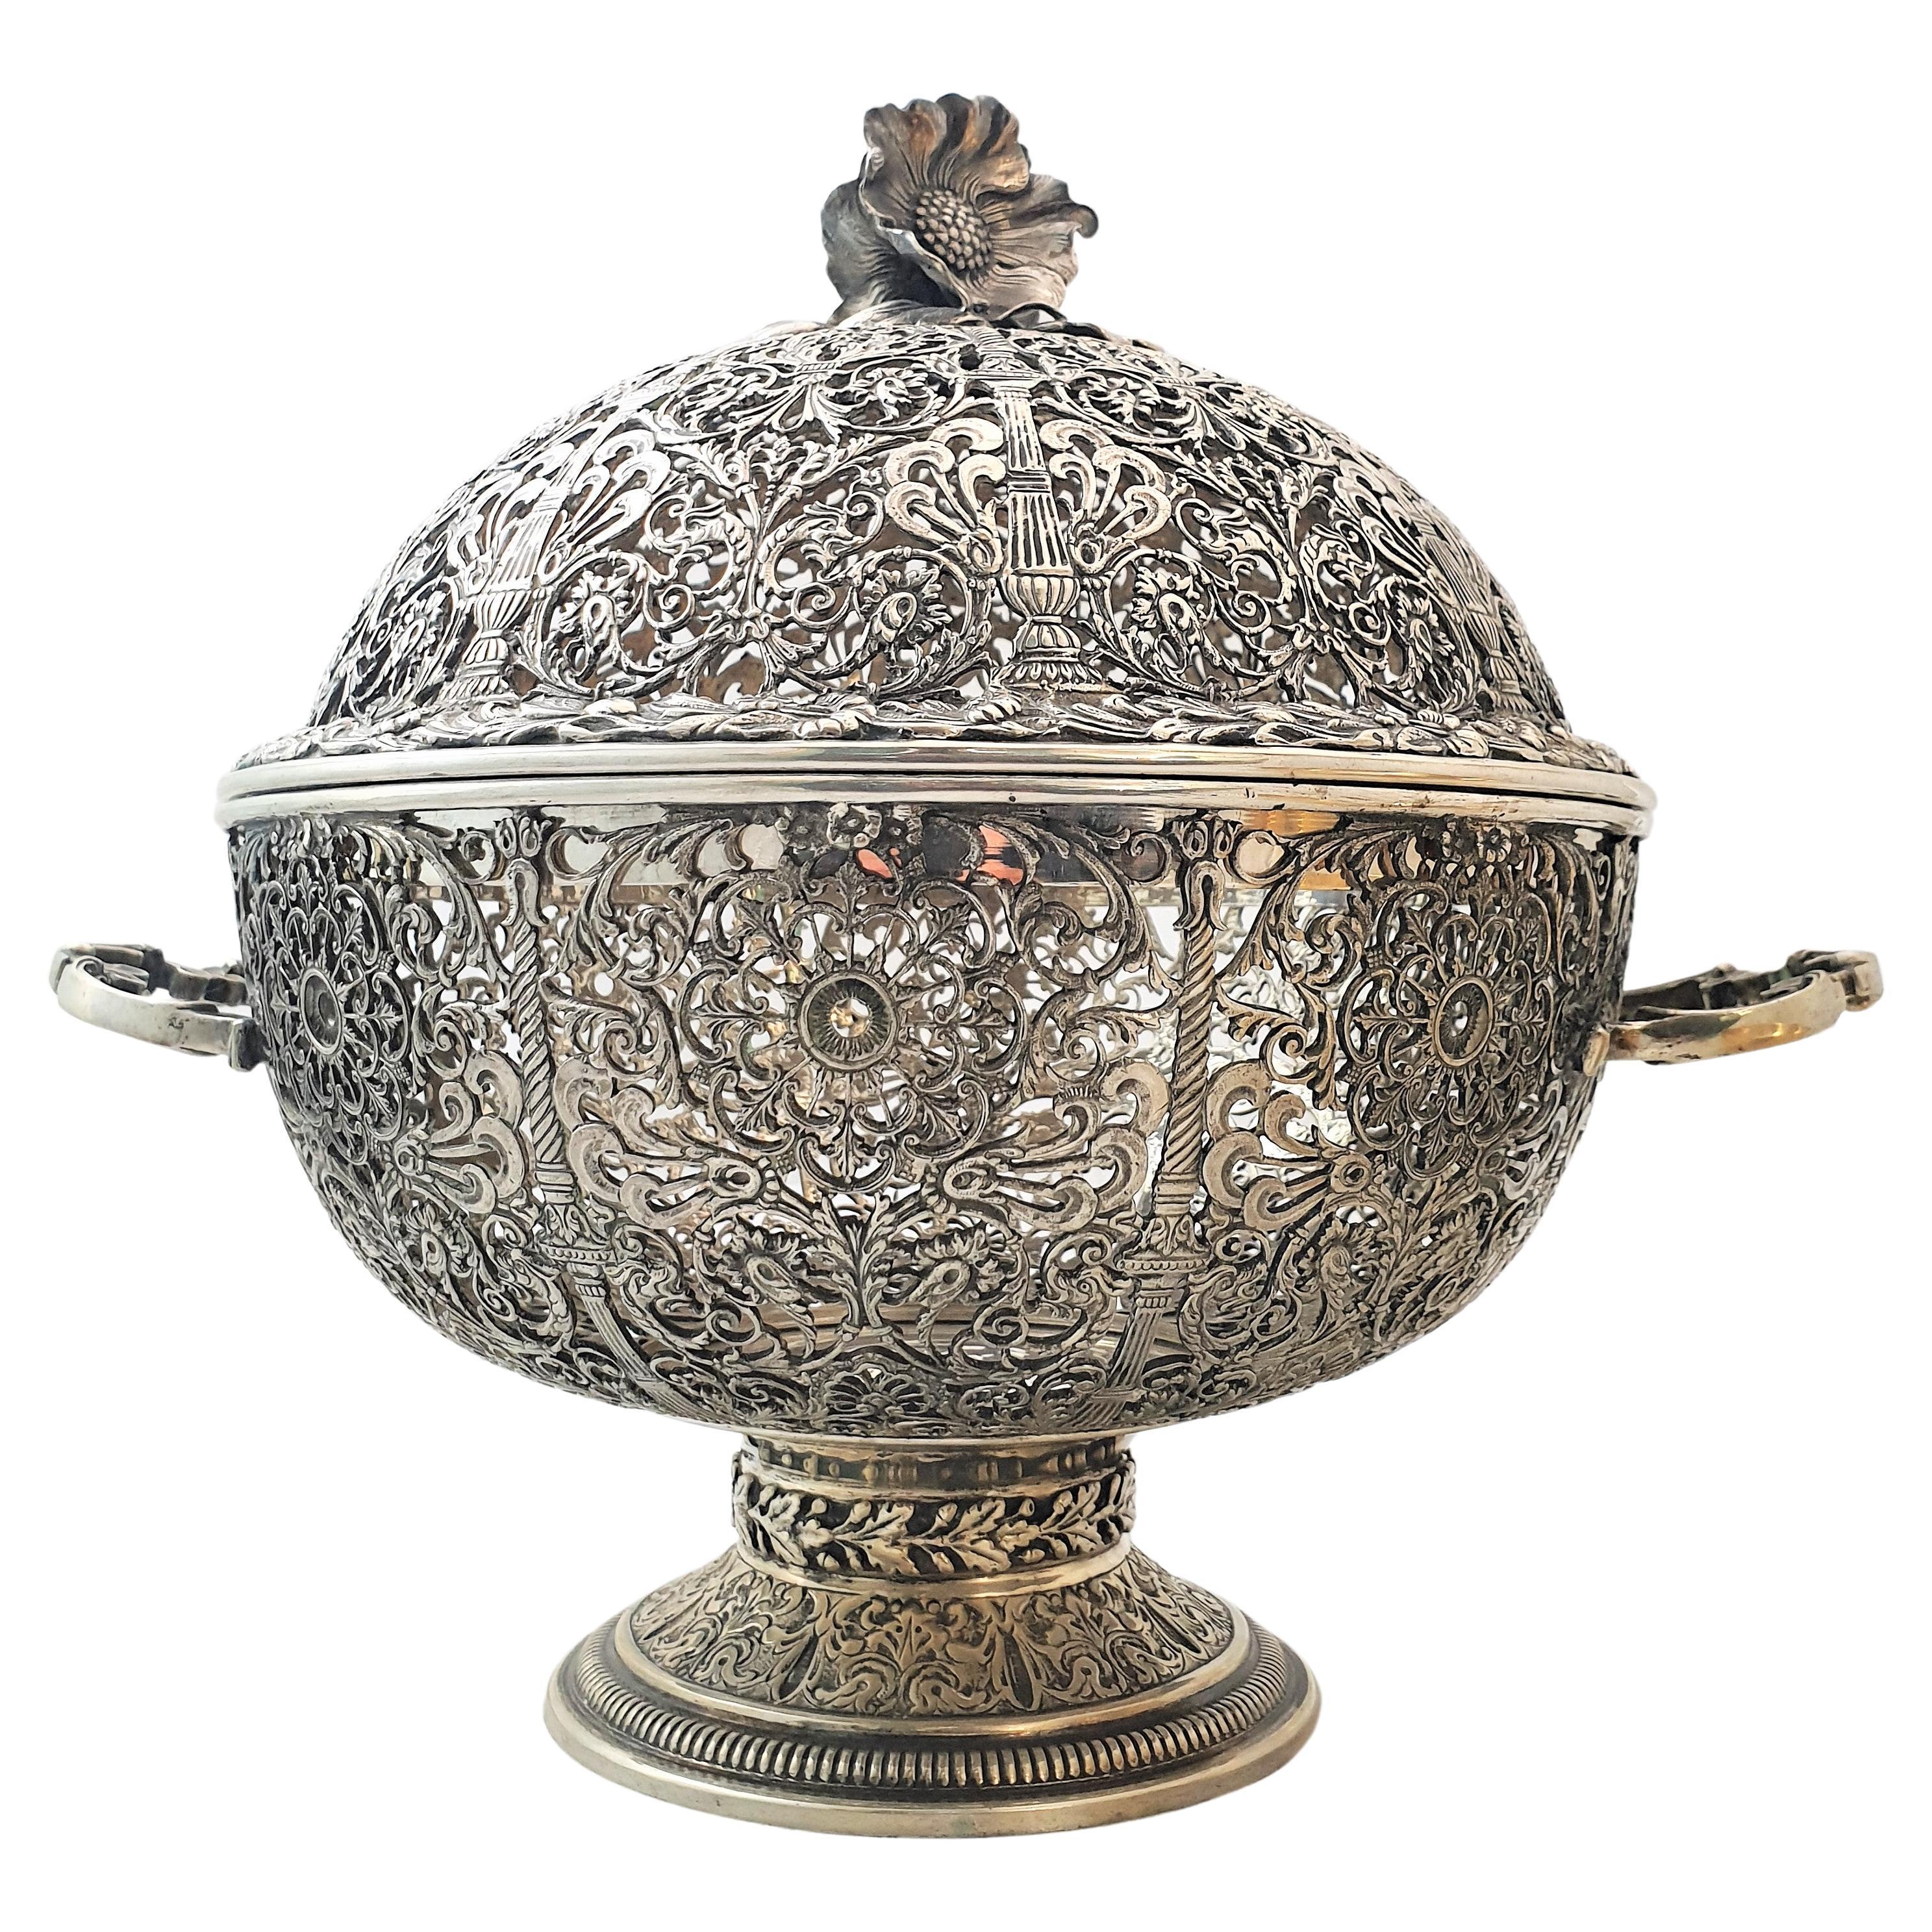 Wonderful basket centerpiece with cover. 

Realized By Messulam Silversmith in Milan, Italy around 1950s

Realized in silver and gilt silver with an excellent fretwork

Fret base, with inside bowl (gilt) and fret cover with flower finial